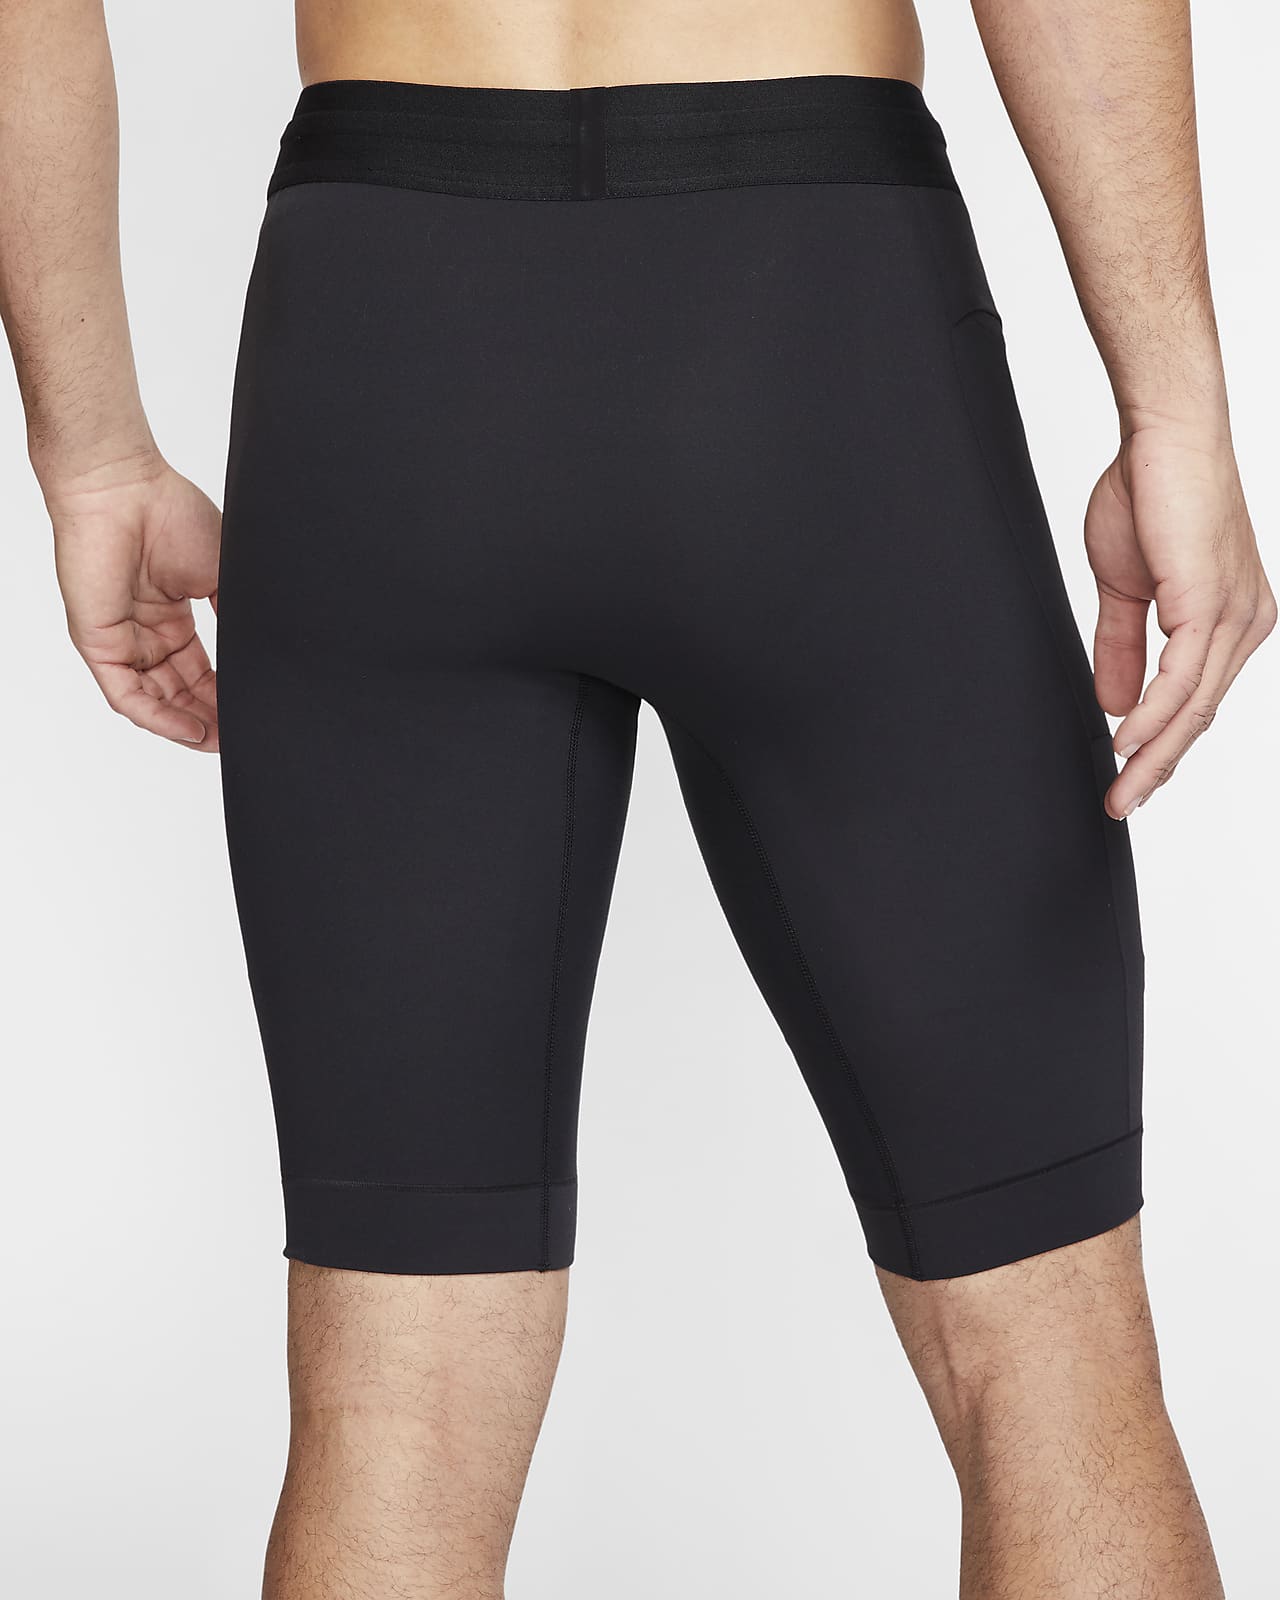 M&S&W Mens Soft Mesh Dry Compression Yoga Workout Tight Shorts